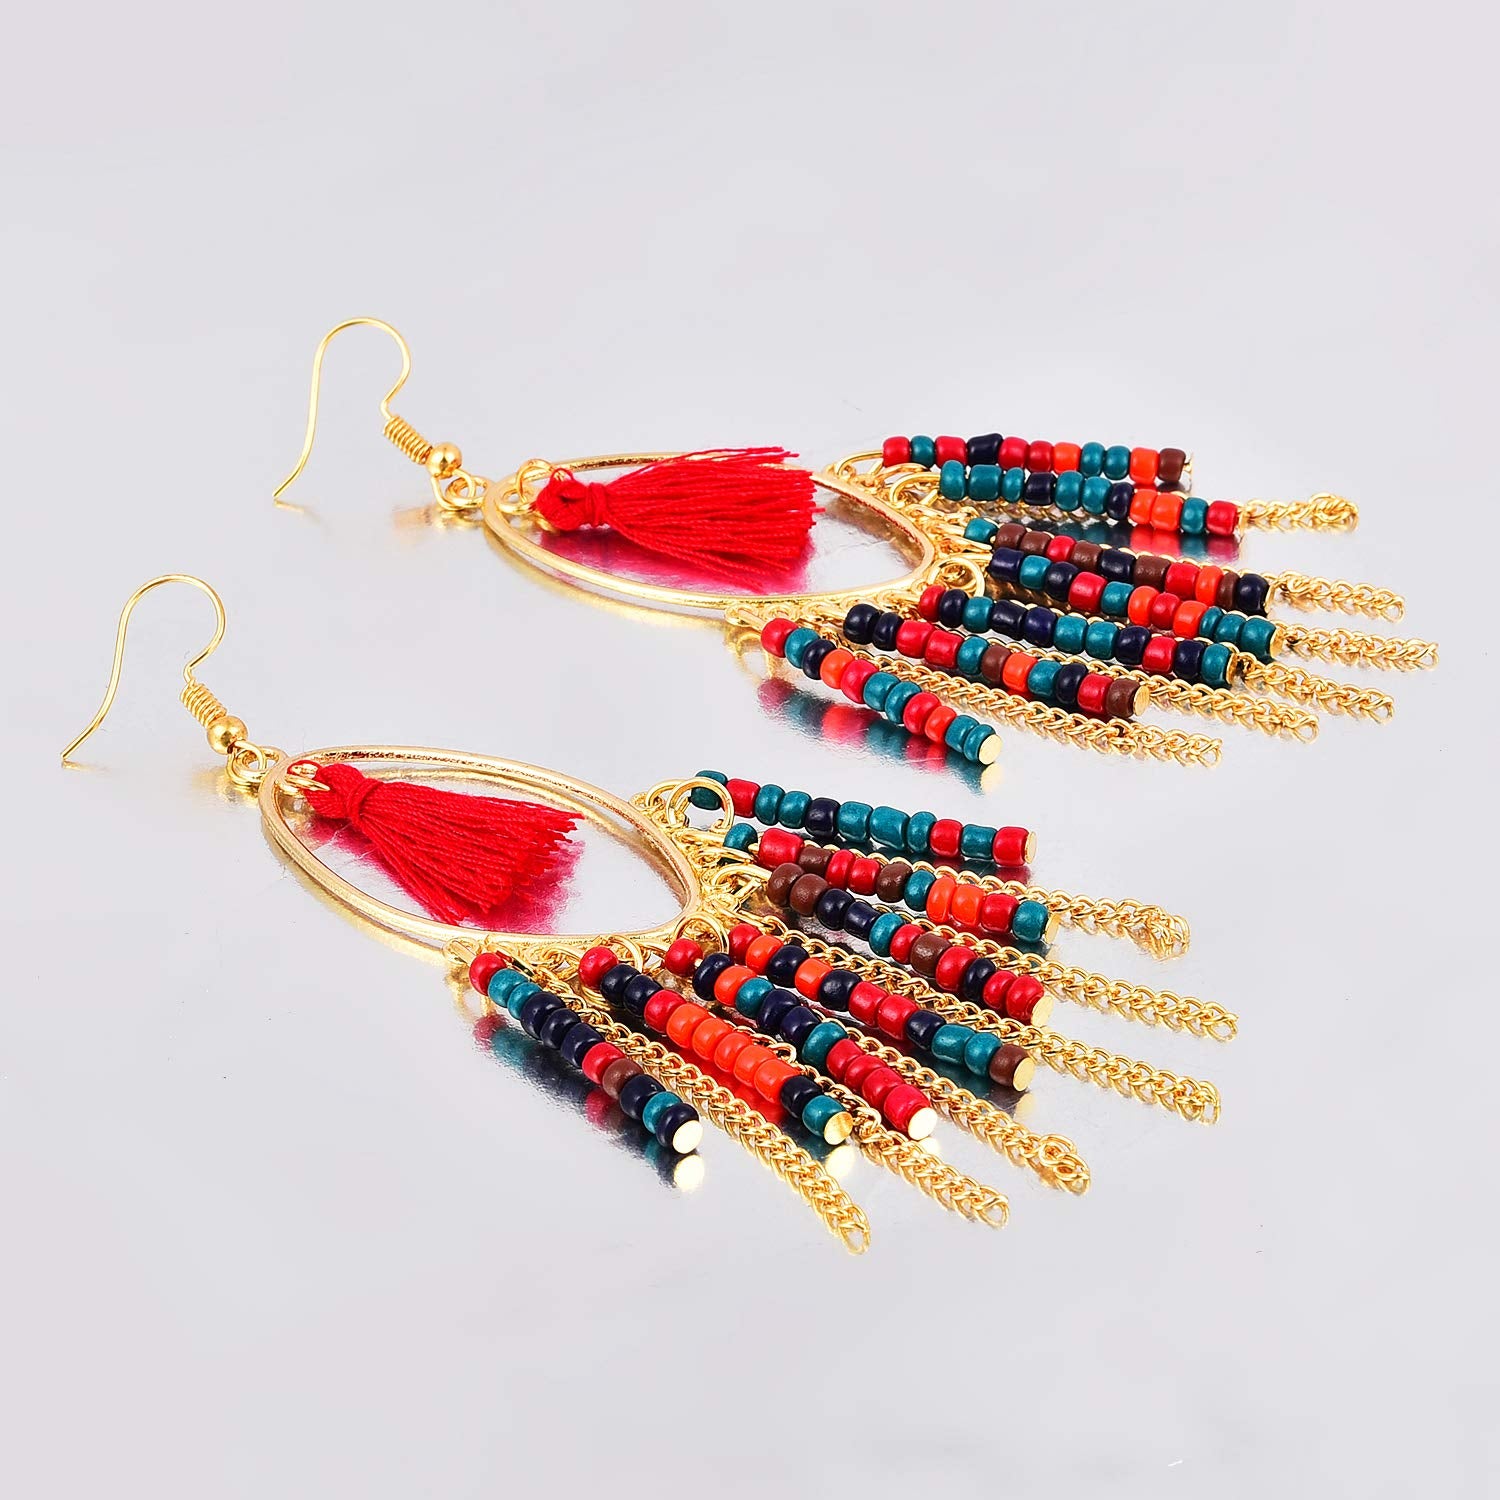 Yellow Chimes Colorful Beads Multicolor Tassel Earring for Women & Girls